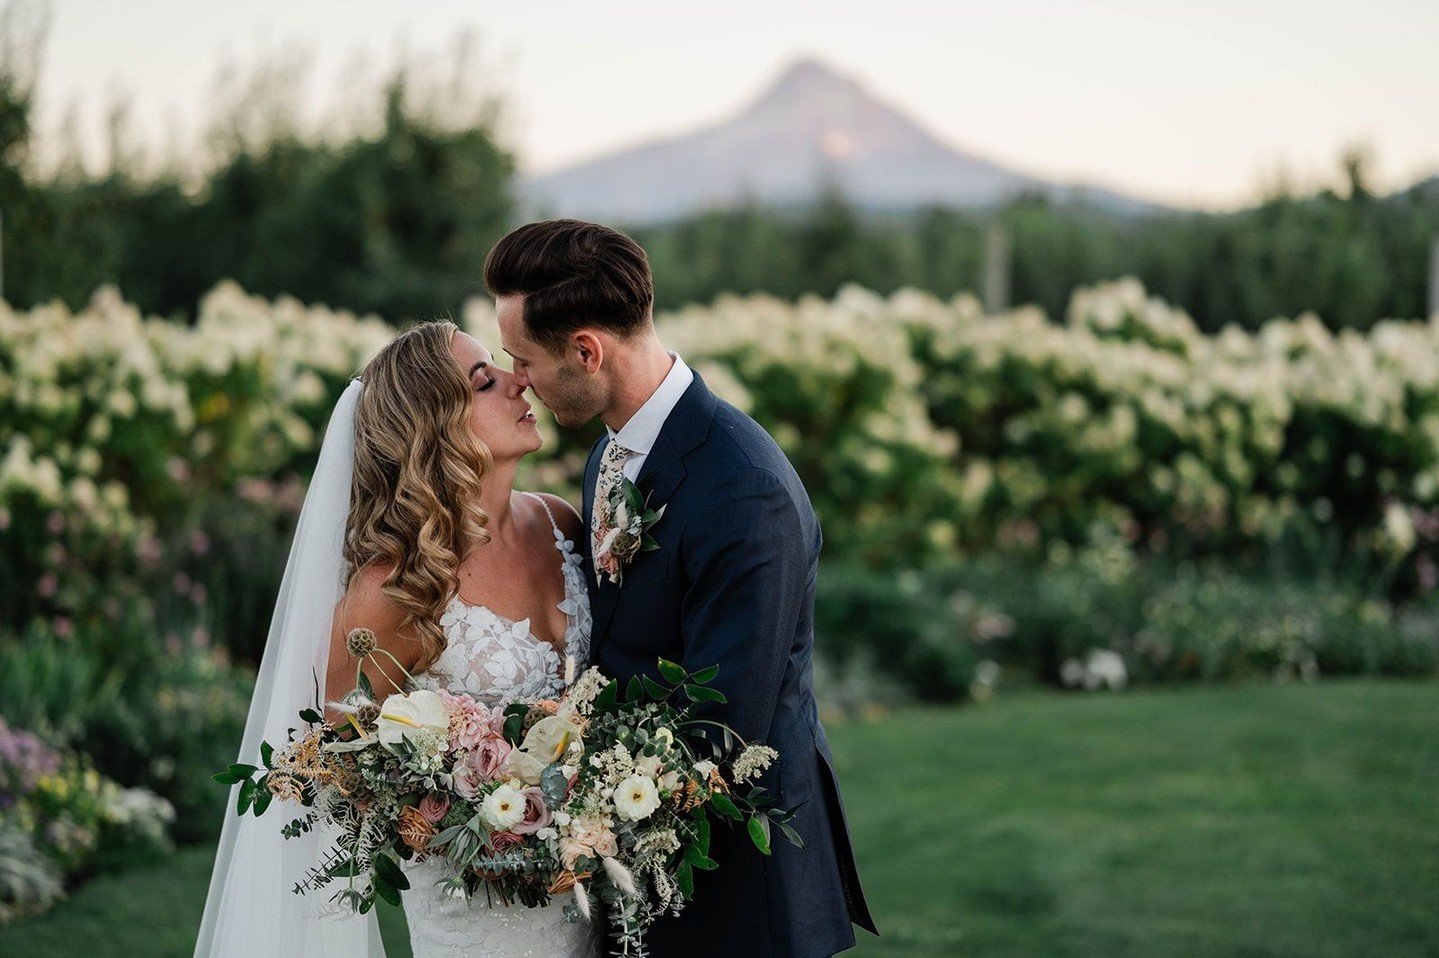 Why settle for one mountain in your photos, when you can have two! At The Orchard you not only have stunning views of Mt. Hood, but also Mt. Adams! ⁣
⁣
Day of Coordinator | @lovenotes.hr⁣⁣⁣
Photographer | @tilldeathdoweadventure⁣⁣⁣
Videographer | @fi